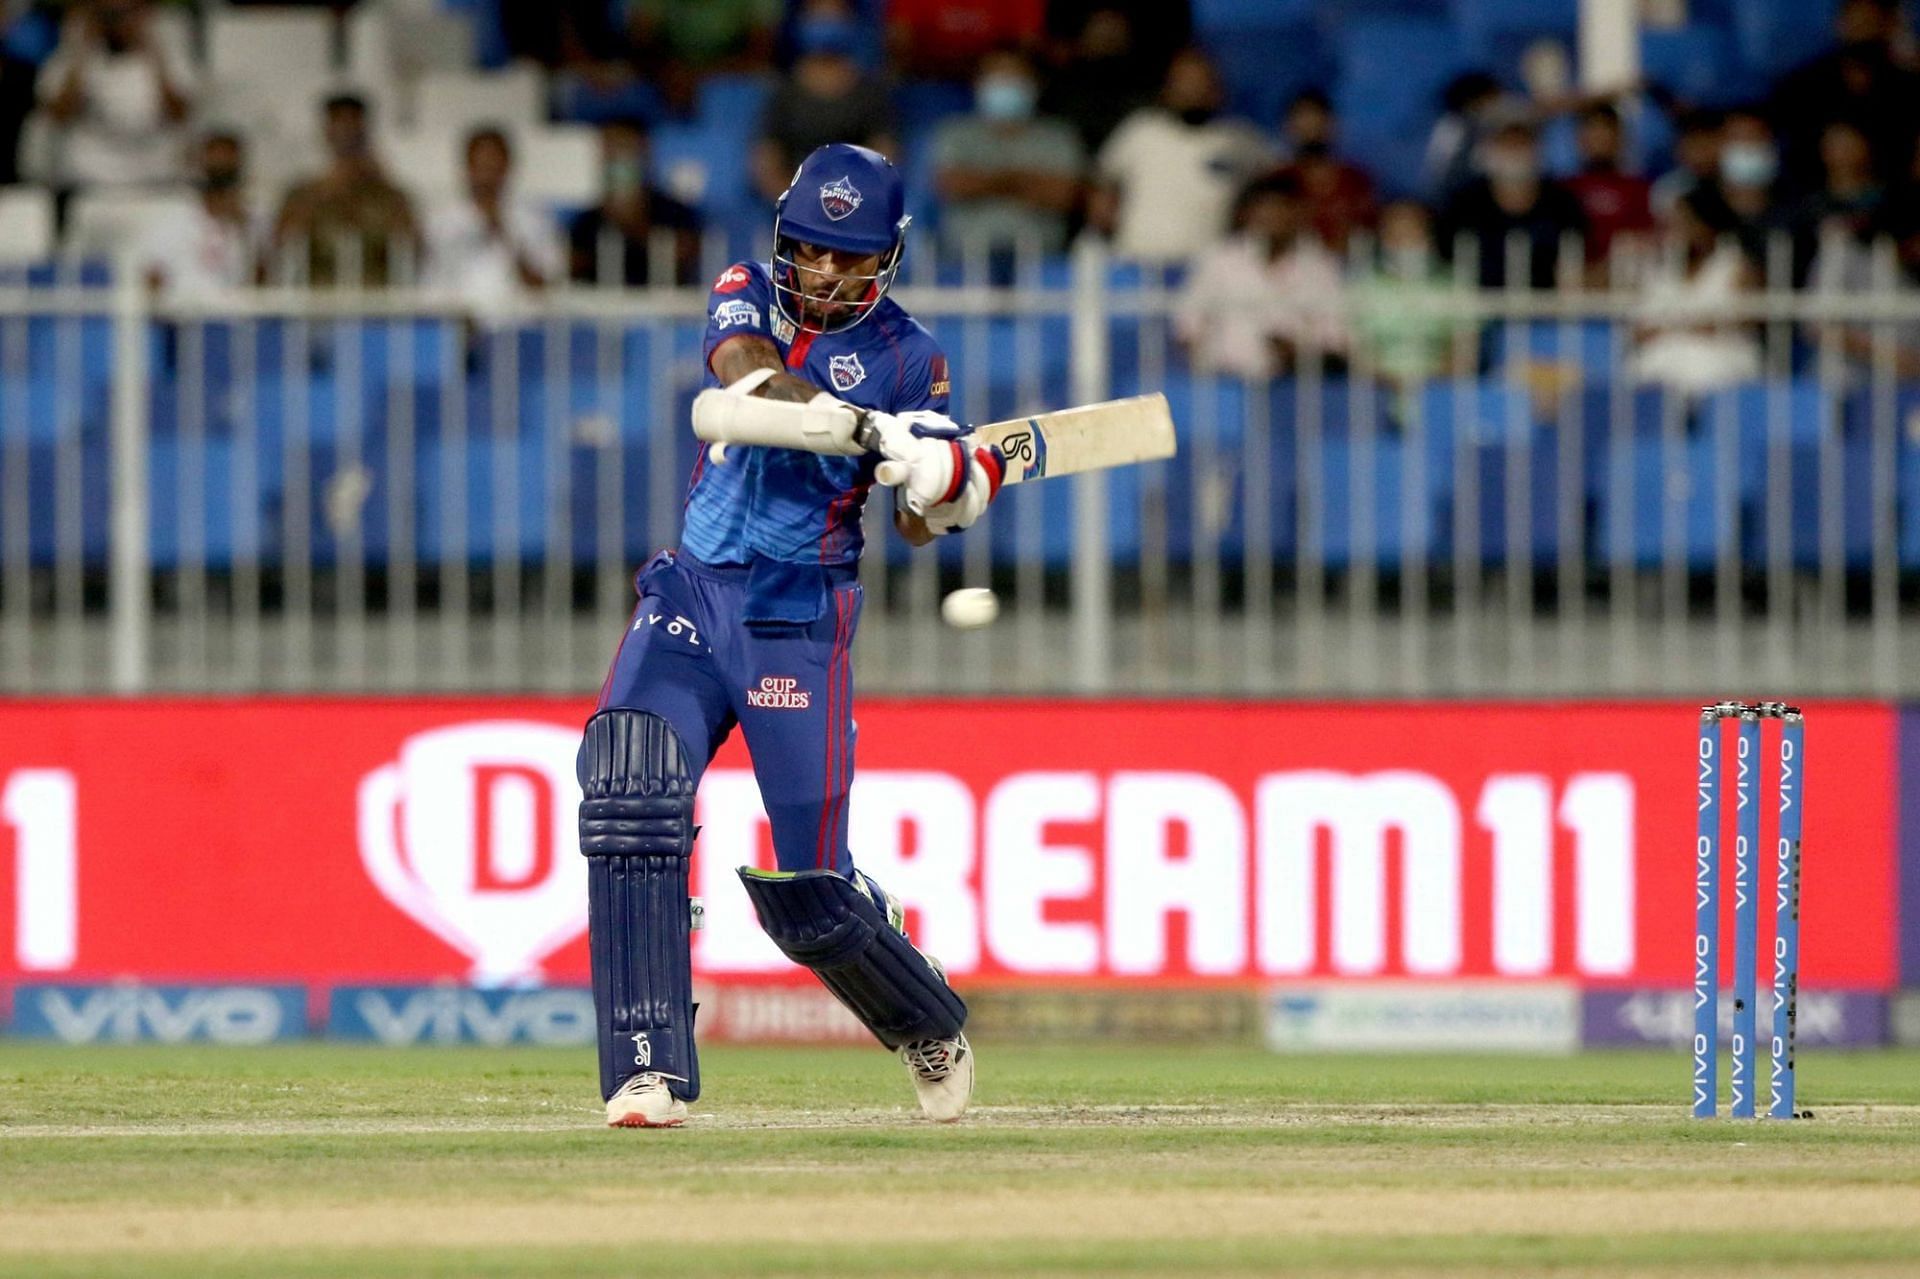 Shikhar Dhawan was the only Delhi Capitals batter to score more than 500 runs in IPL 2021. (Image Courtesy: IPLT20.com)